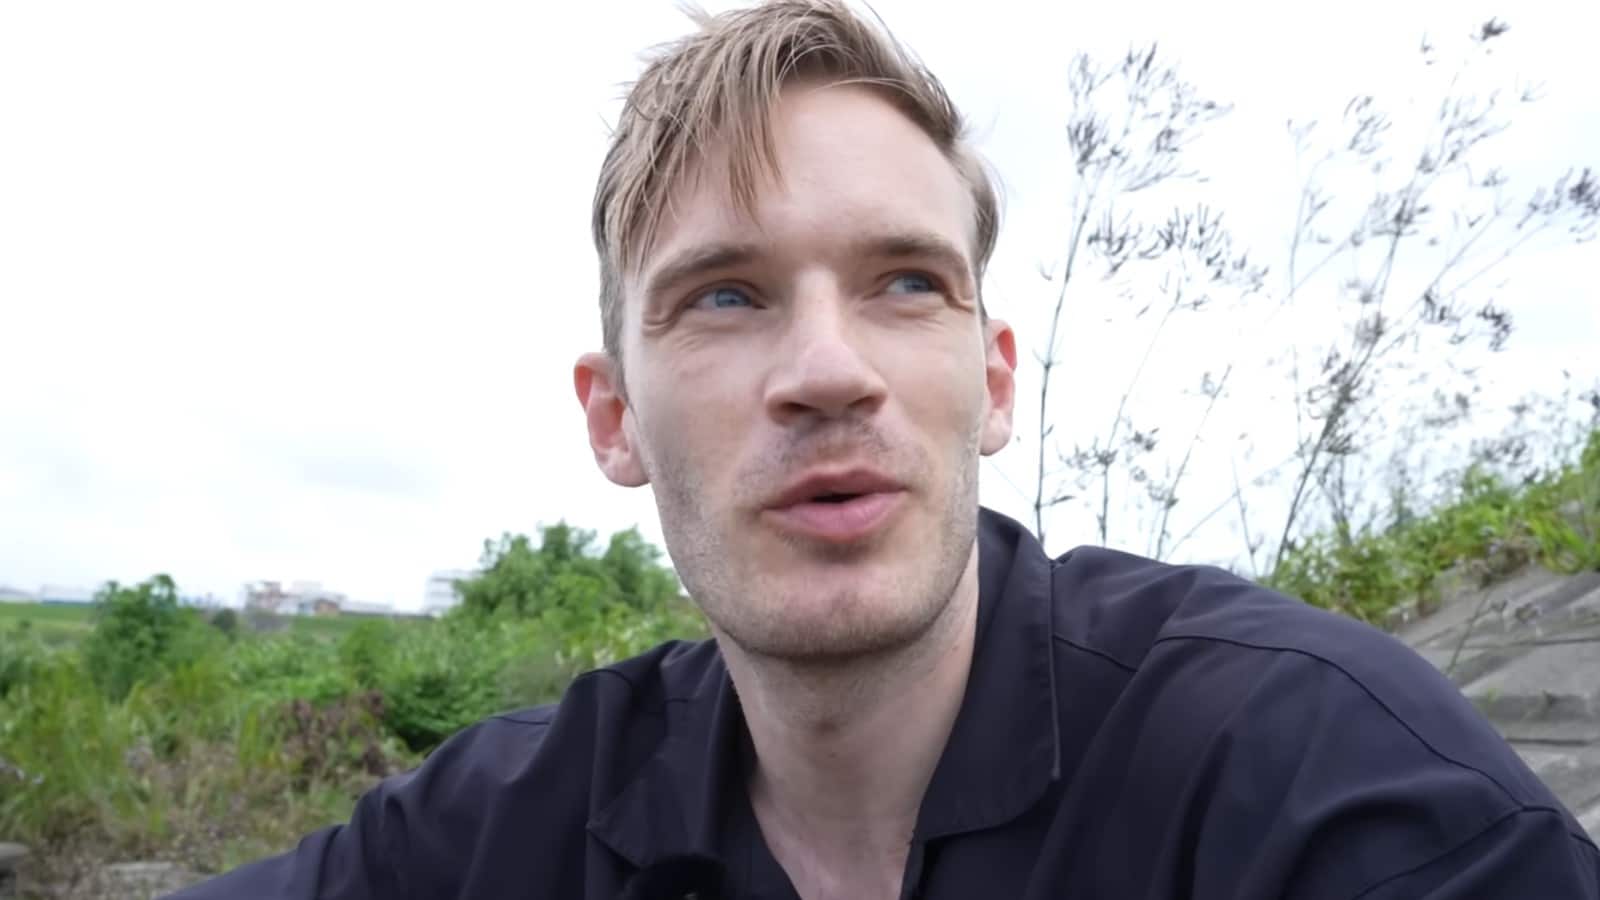 PewDiePie talking to camera during YouTube Q&A